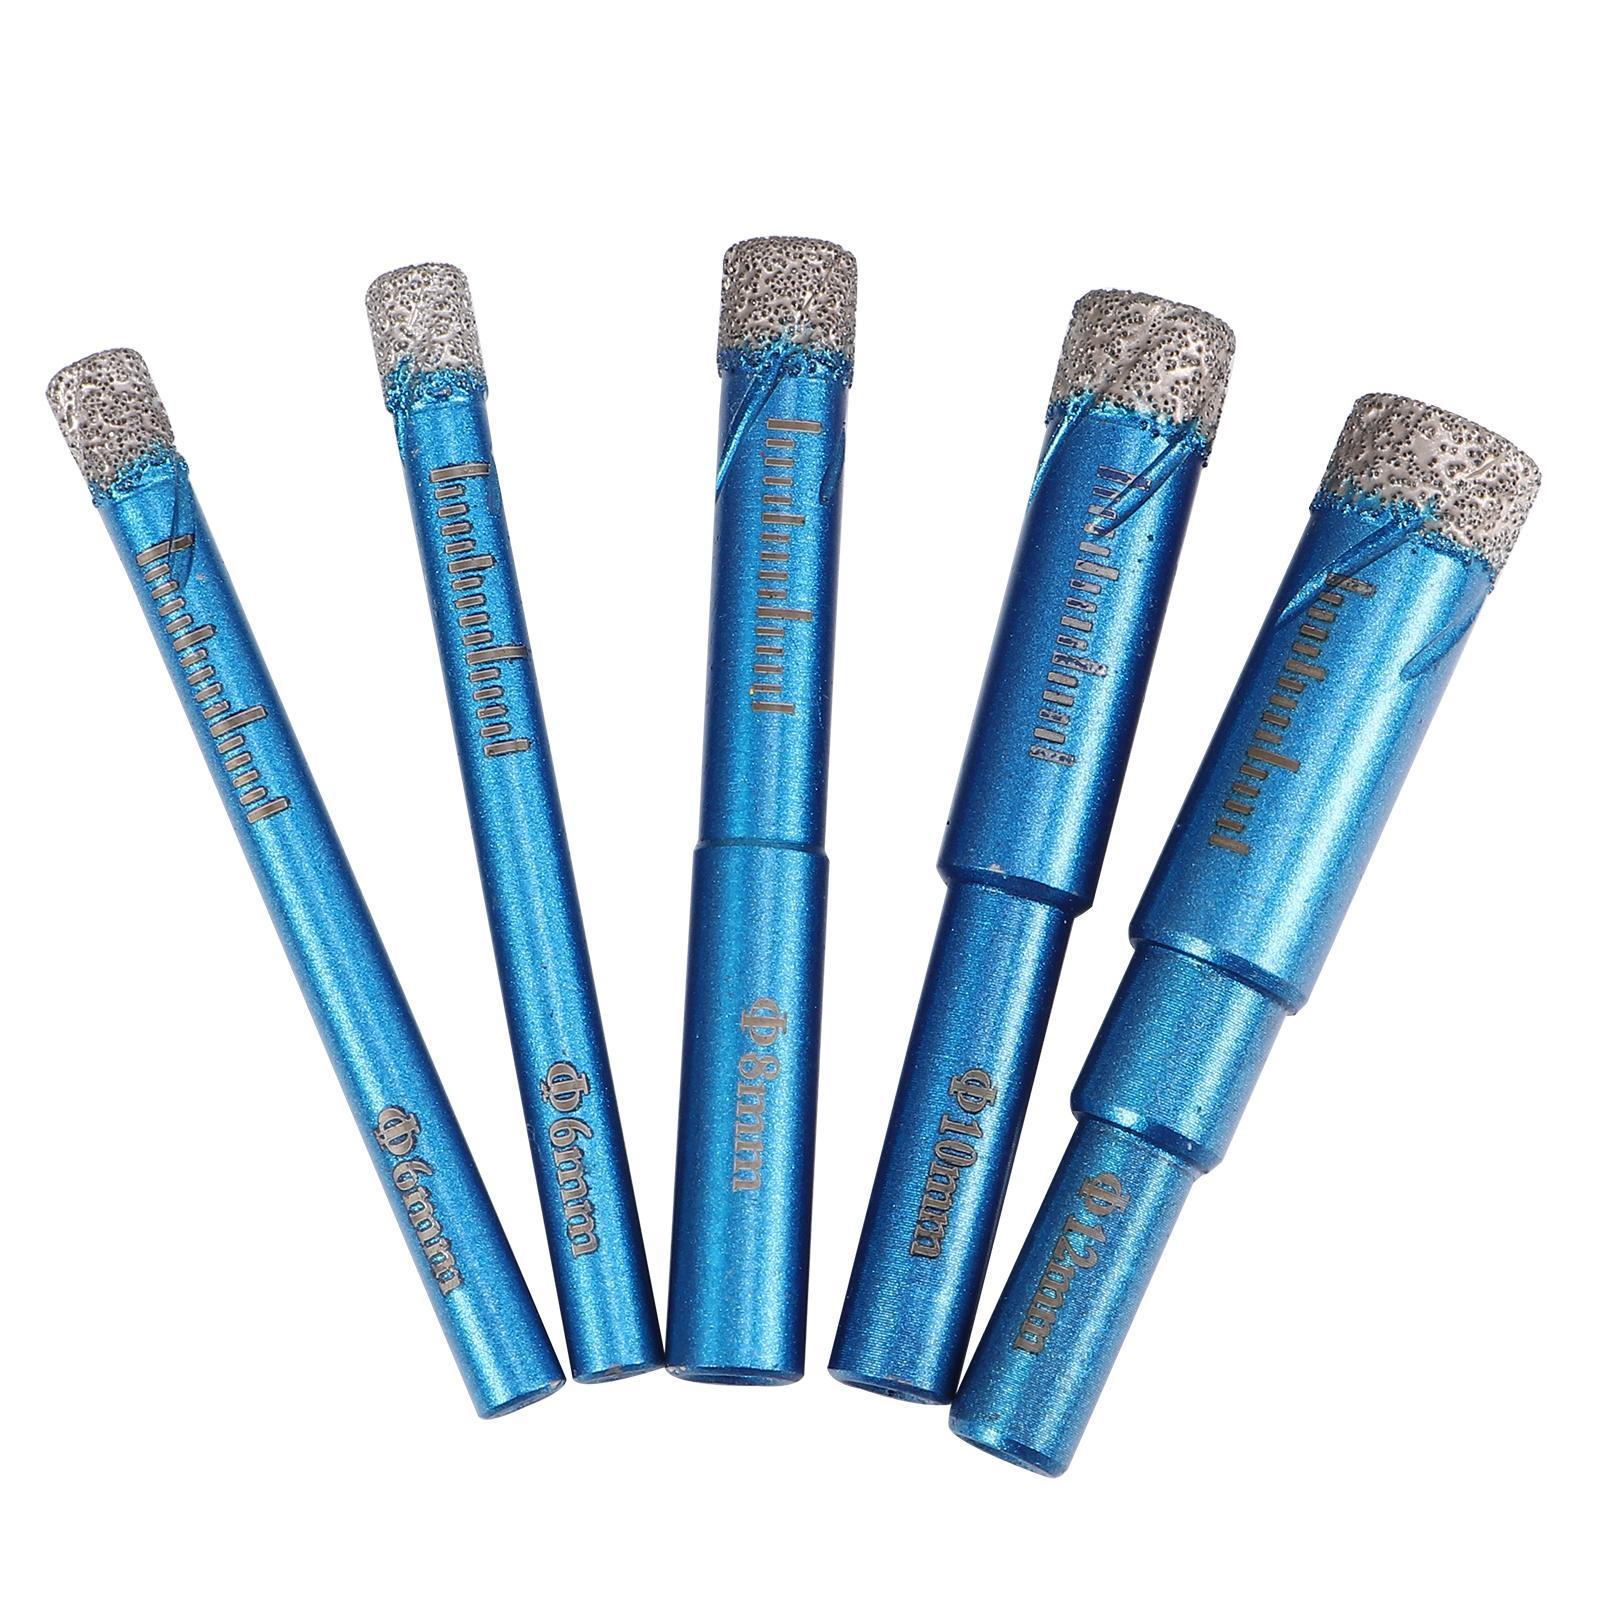 5 Pcs Hole Opener Hand Tools Accessories Dry Diamond Drill Bit Alloy Saws Kit Ceramic Tile Extractor Remover